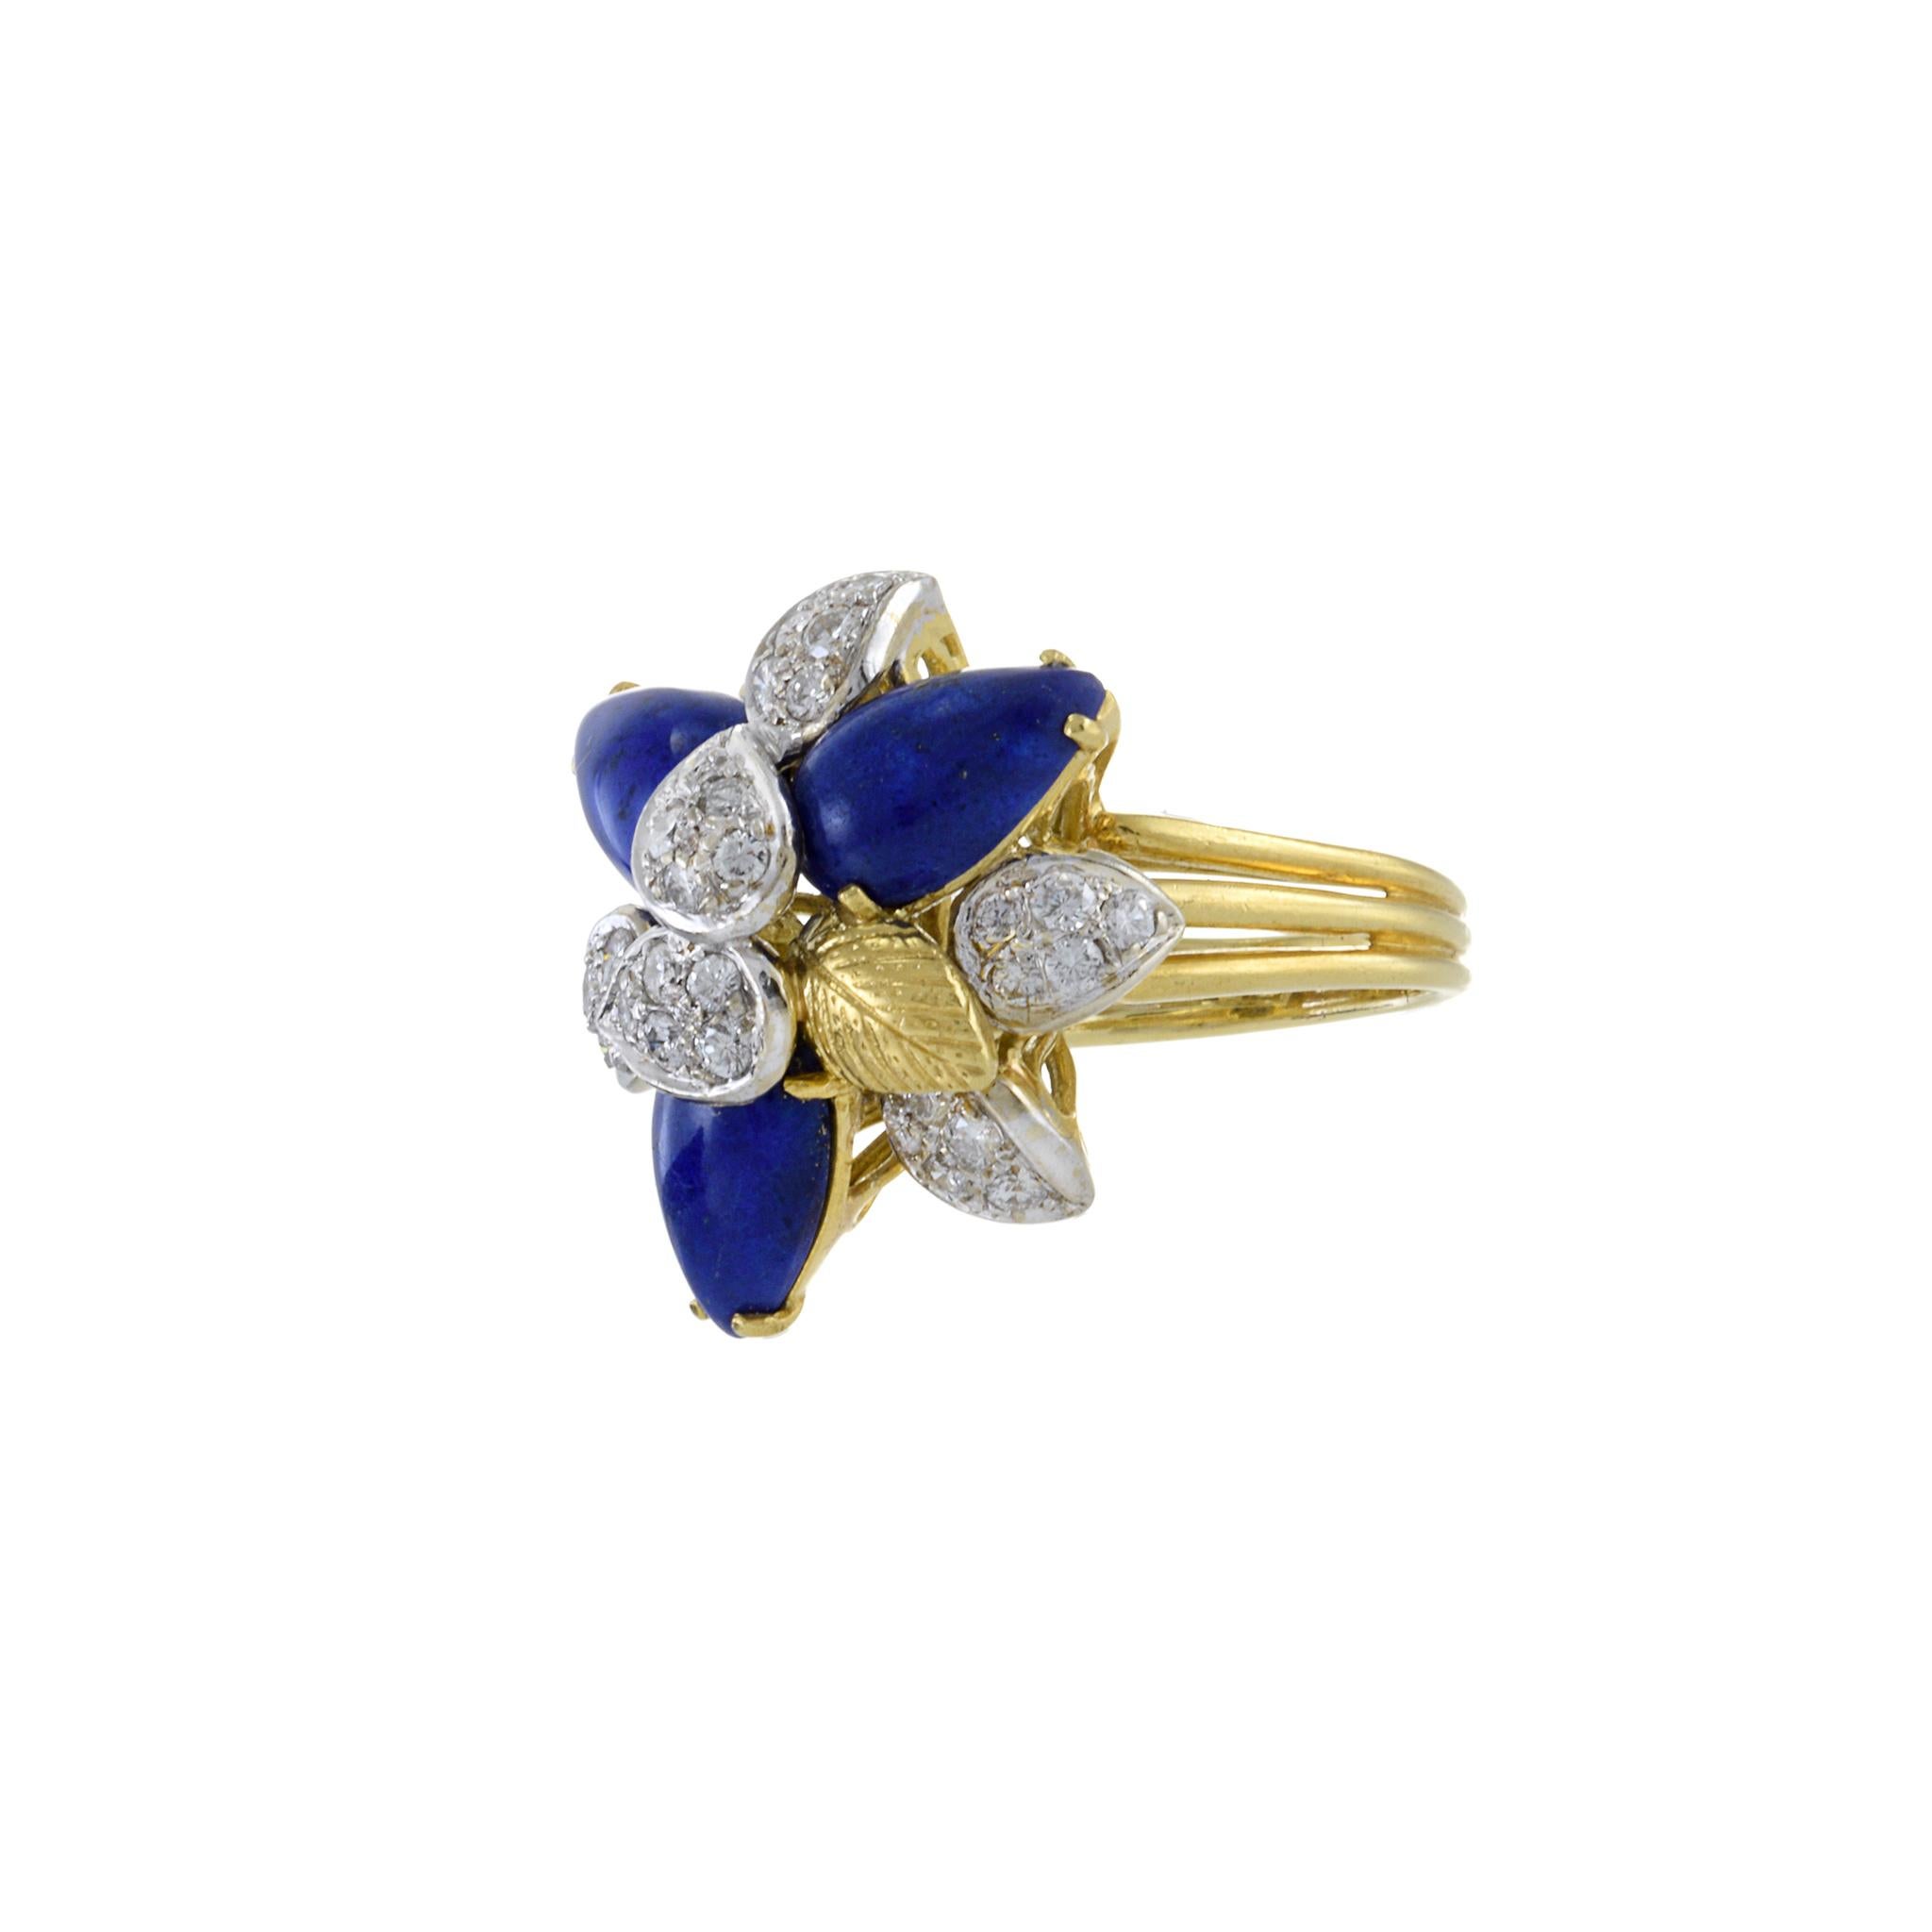 The Estate Retro Era 18KT Yellow Gold Lapis Lazuli and Diamond Flower Ring is a dazzling embodiment of vintage charm and elegance. This exquisite piece beautifully marries the deep, celestial blue of lapis lazuli gemstones with the radiant